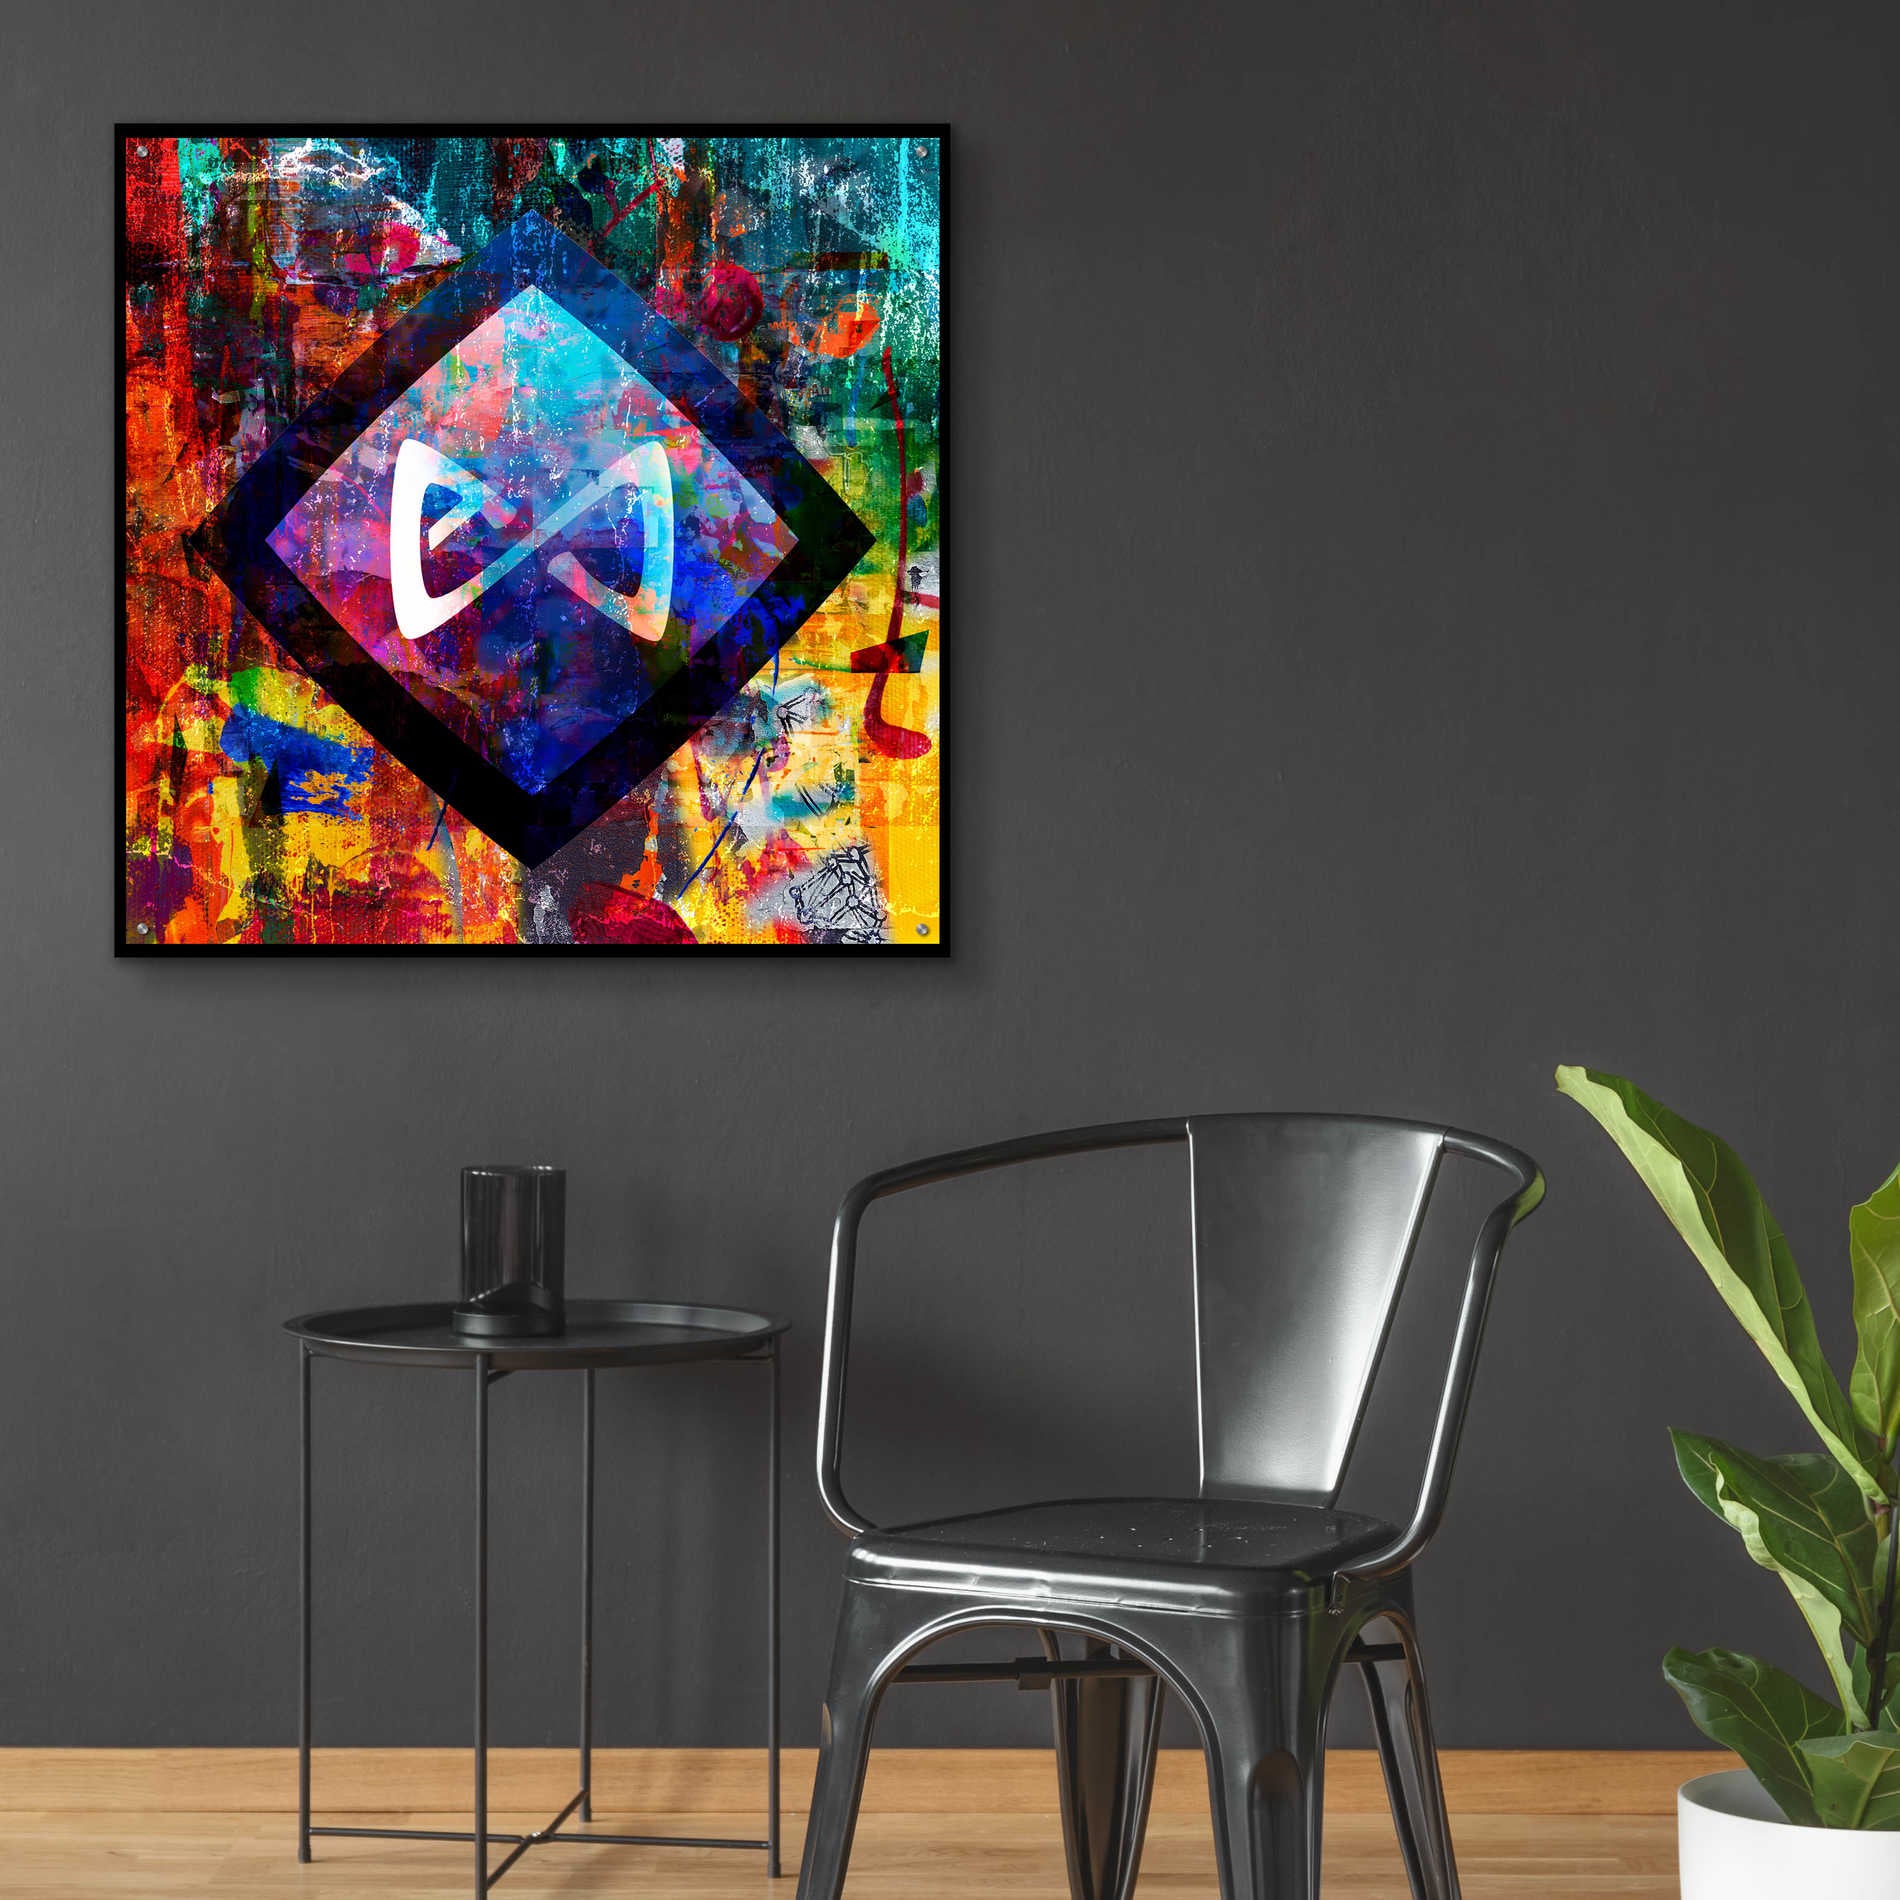 Epic Art 'Axs Axie Crypto In Color' by Epic Art Portfolio, Acrylic Glass Wall Art,36x36